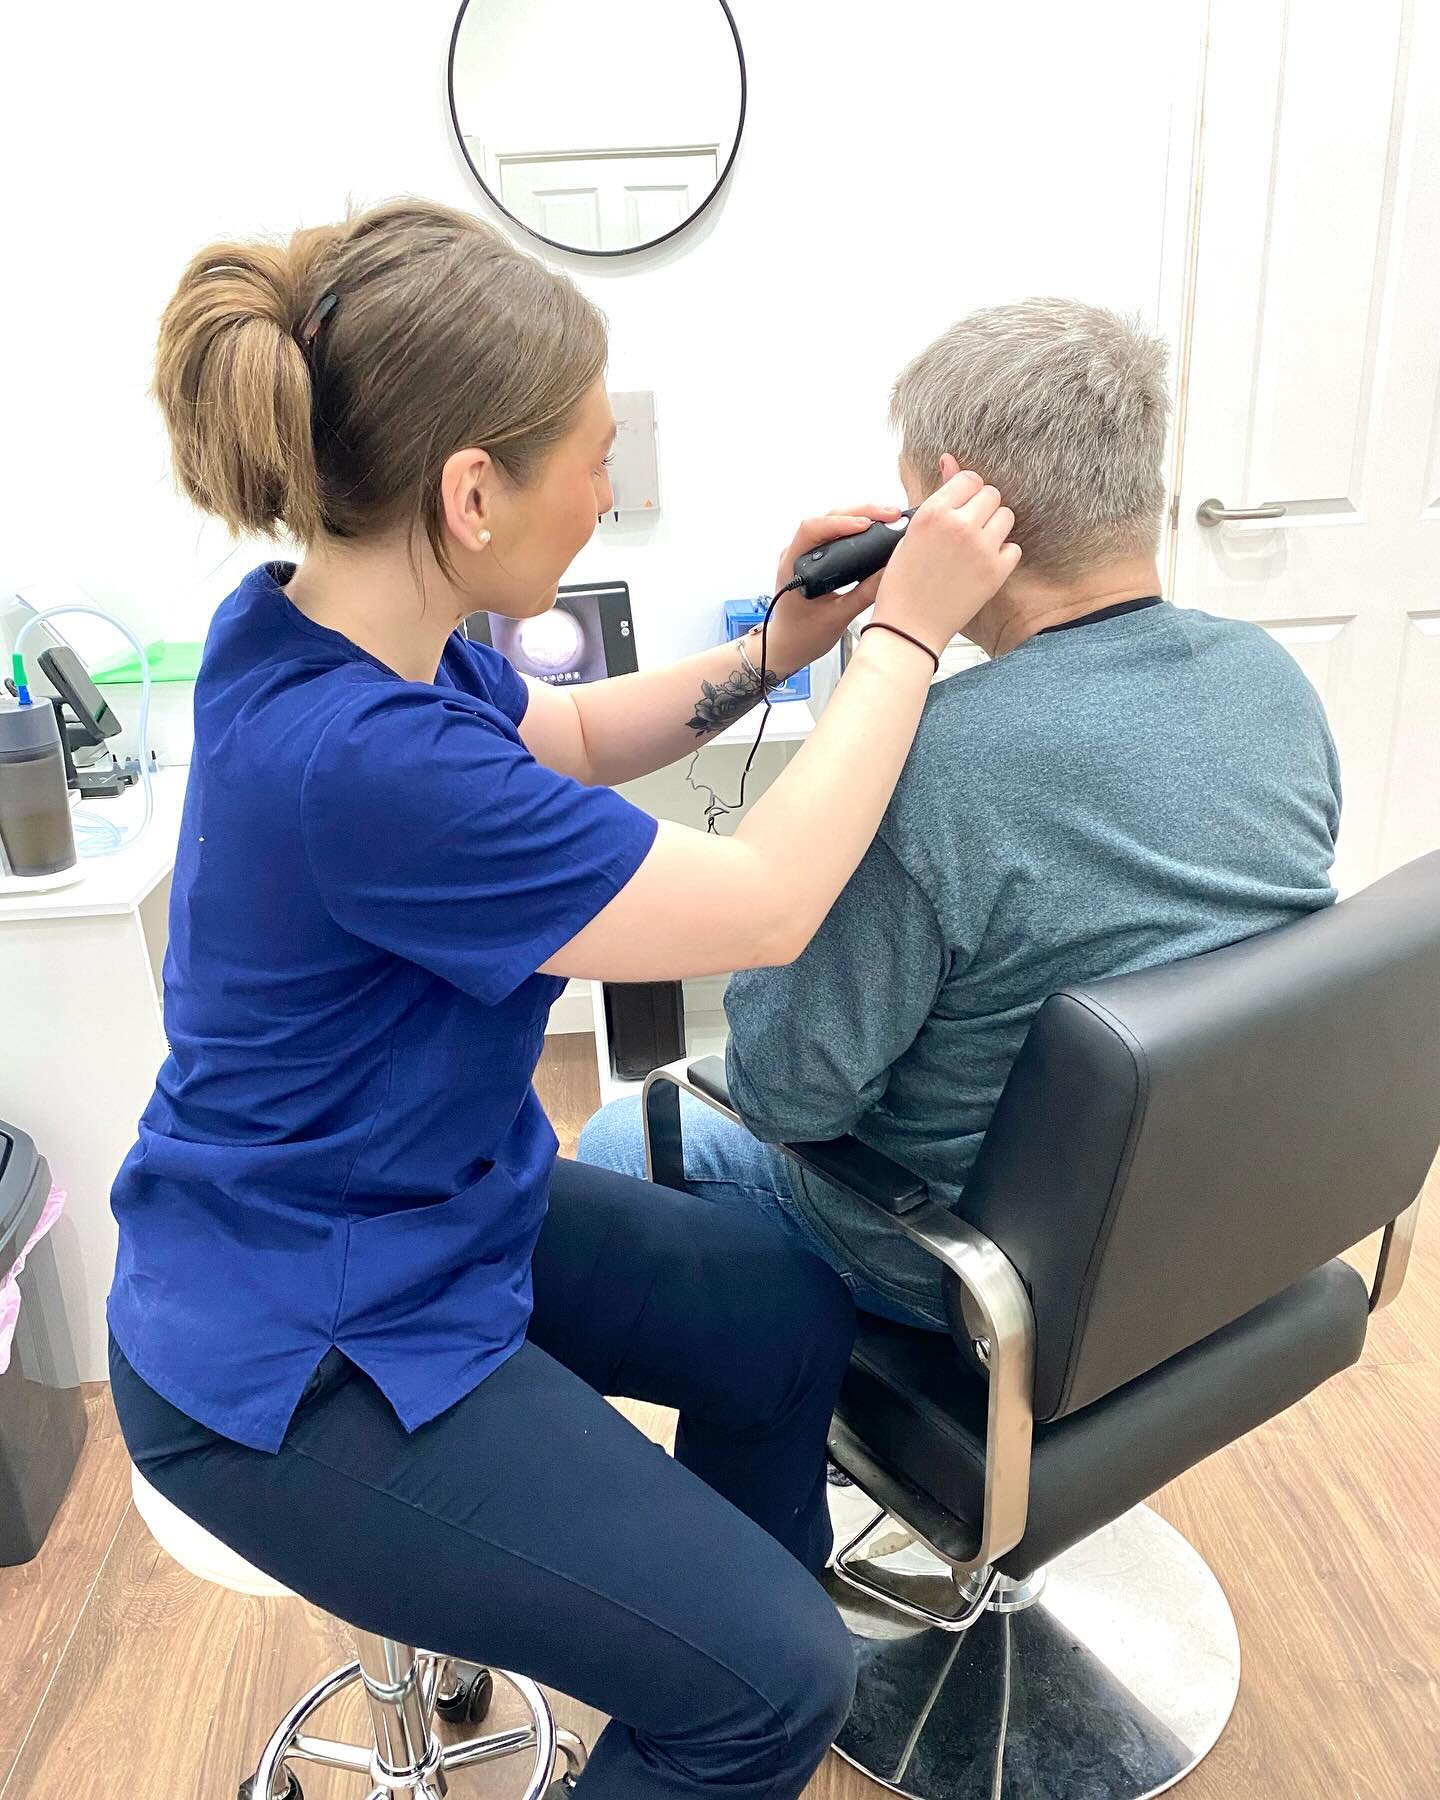 The benefits of using Video Otoscopy 👂🏼🔍📸

✅ Our video otoscope provides a high-definition view of the earcanal and eardrum. Being able to examine your ears using this latest technology helps you better understand your ear health and anatomy. It 